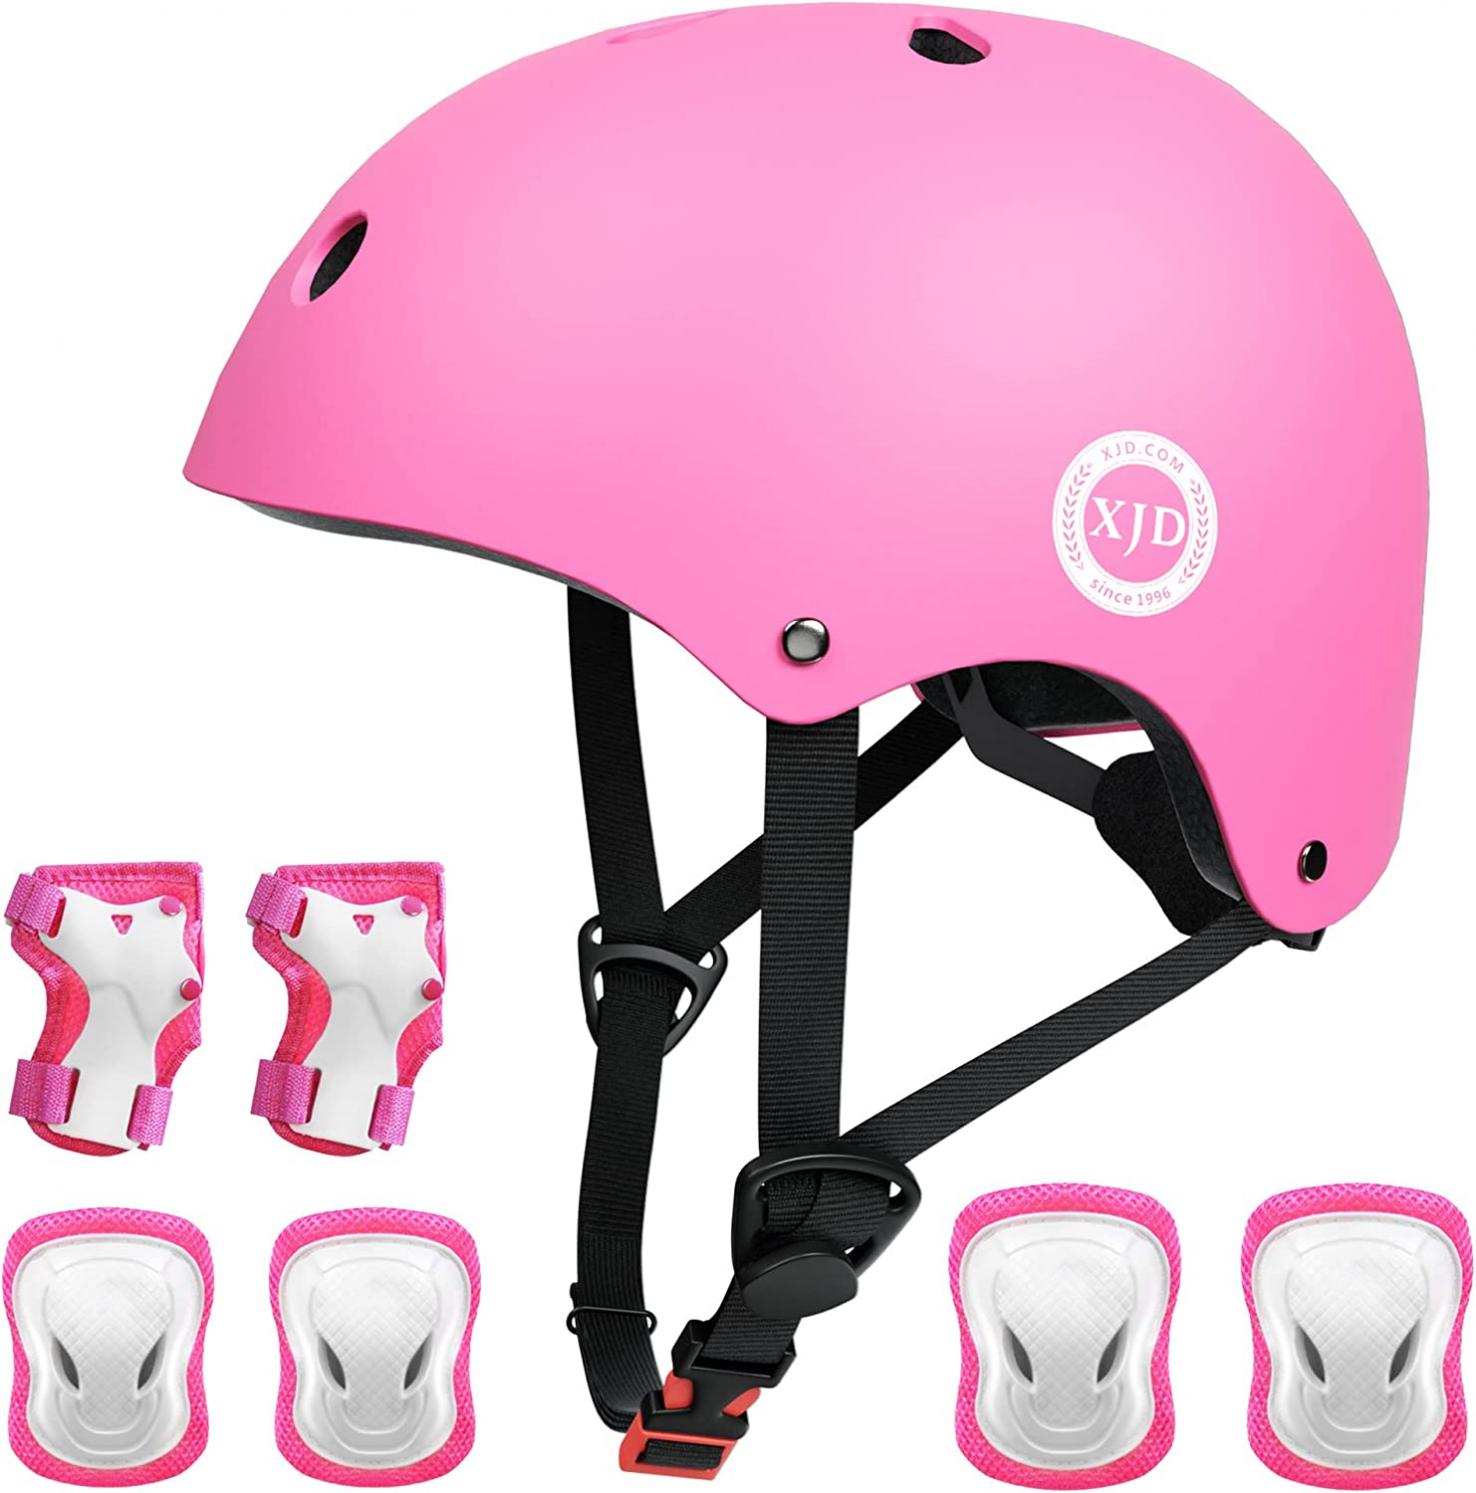 XJD Kids Bike Helmet,Multi-Sport Protective Gear Set for 3-5-8-14 Years Boys Girls with Knee and Elbow Pads Wrist Guards fit Roller Skates,Cycling,Skateboarding,Skating Scooter (Multi-Colors)